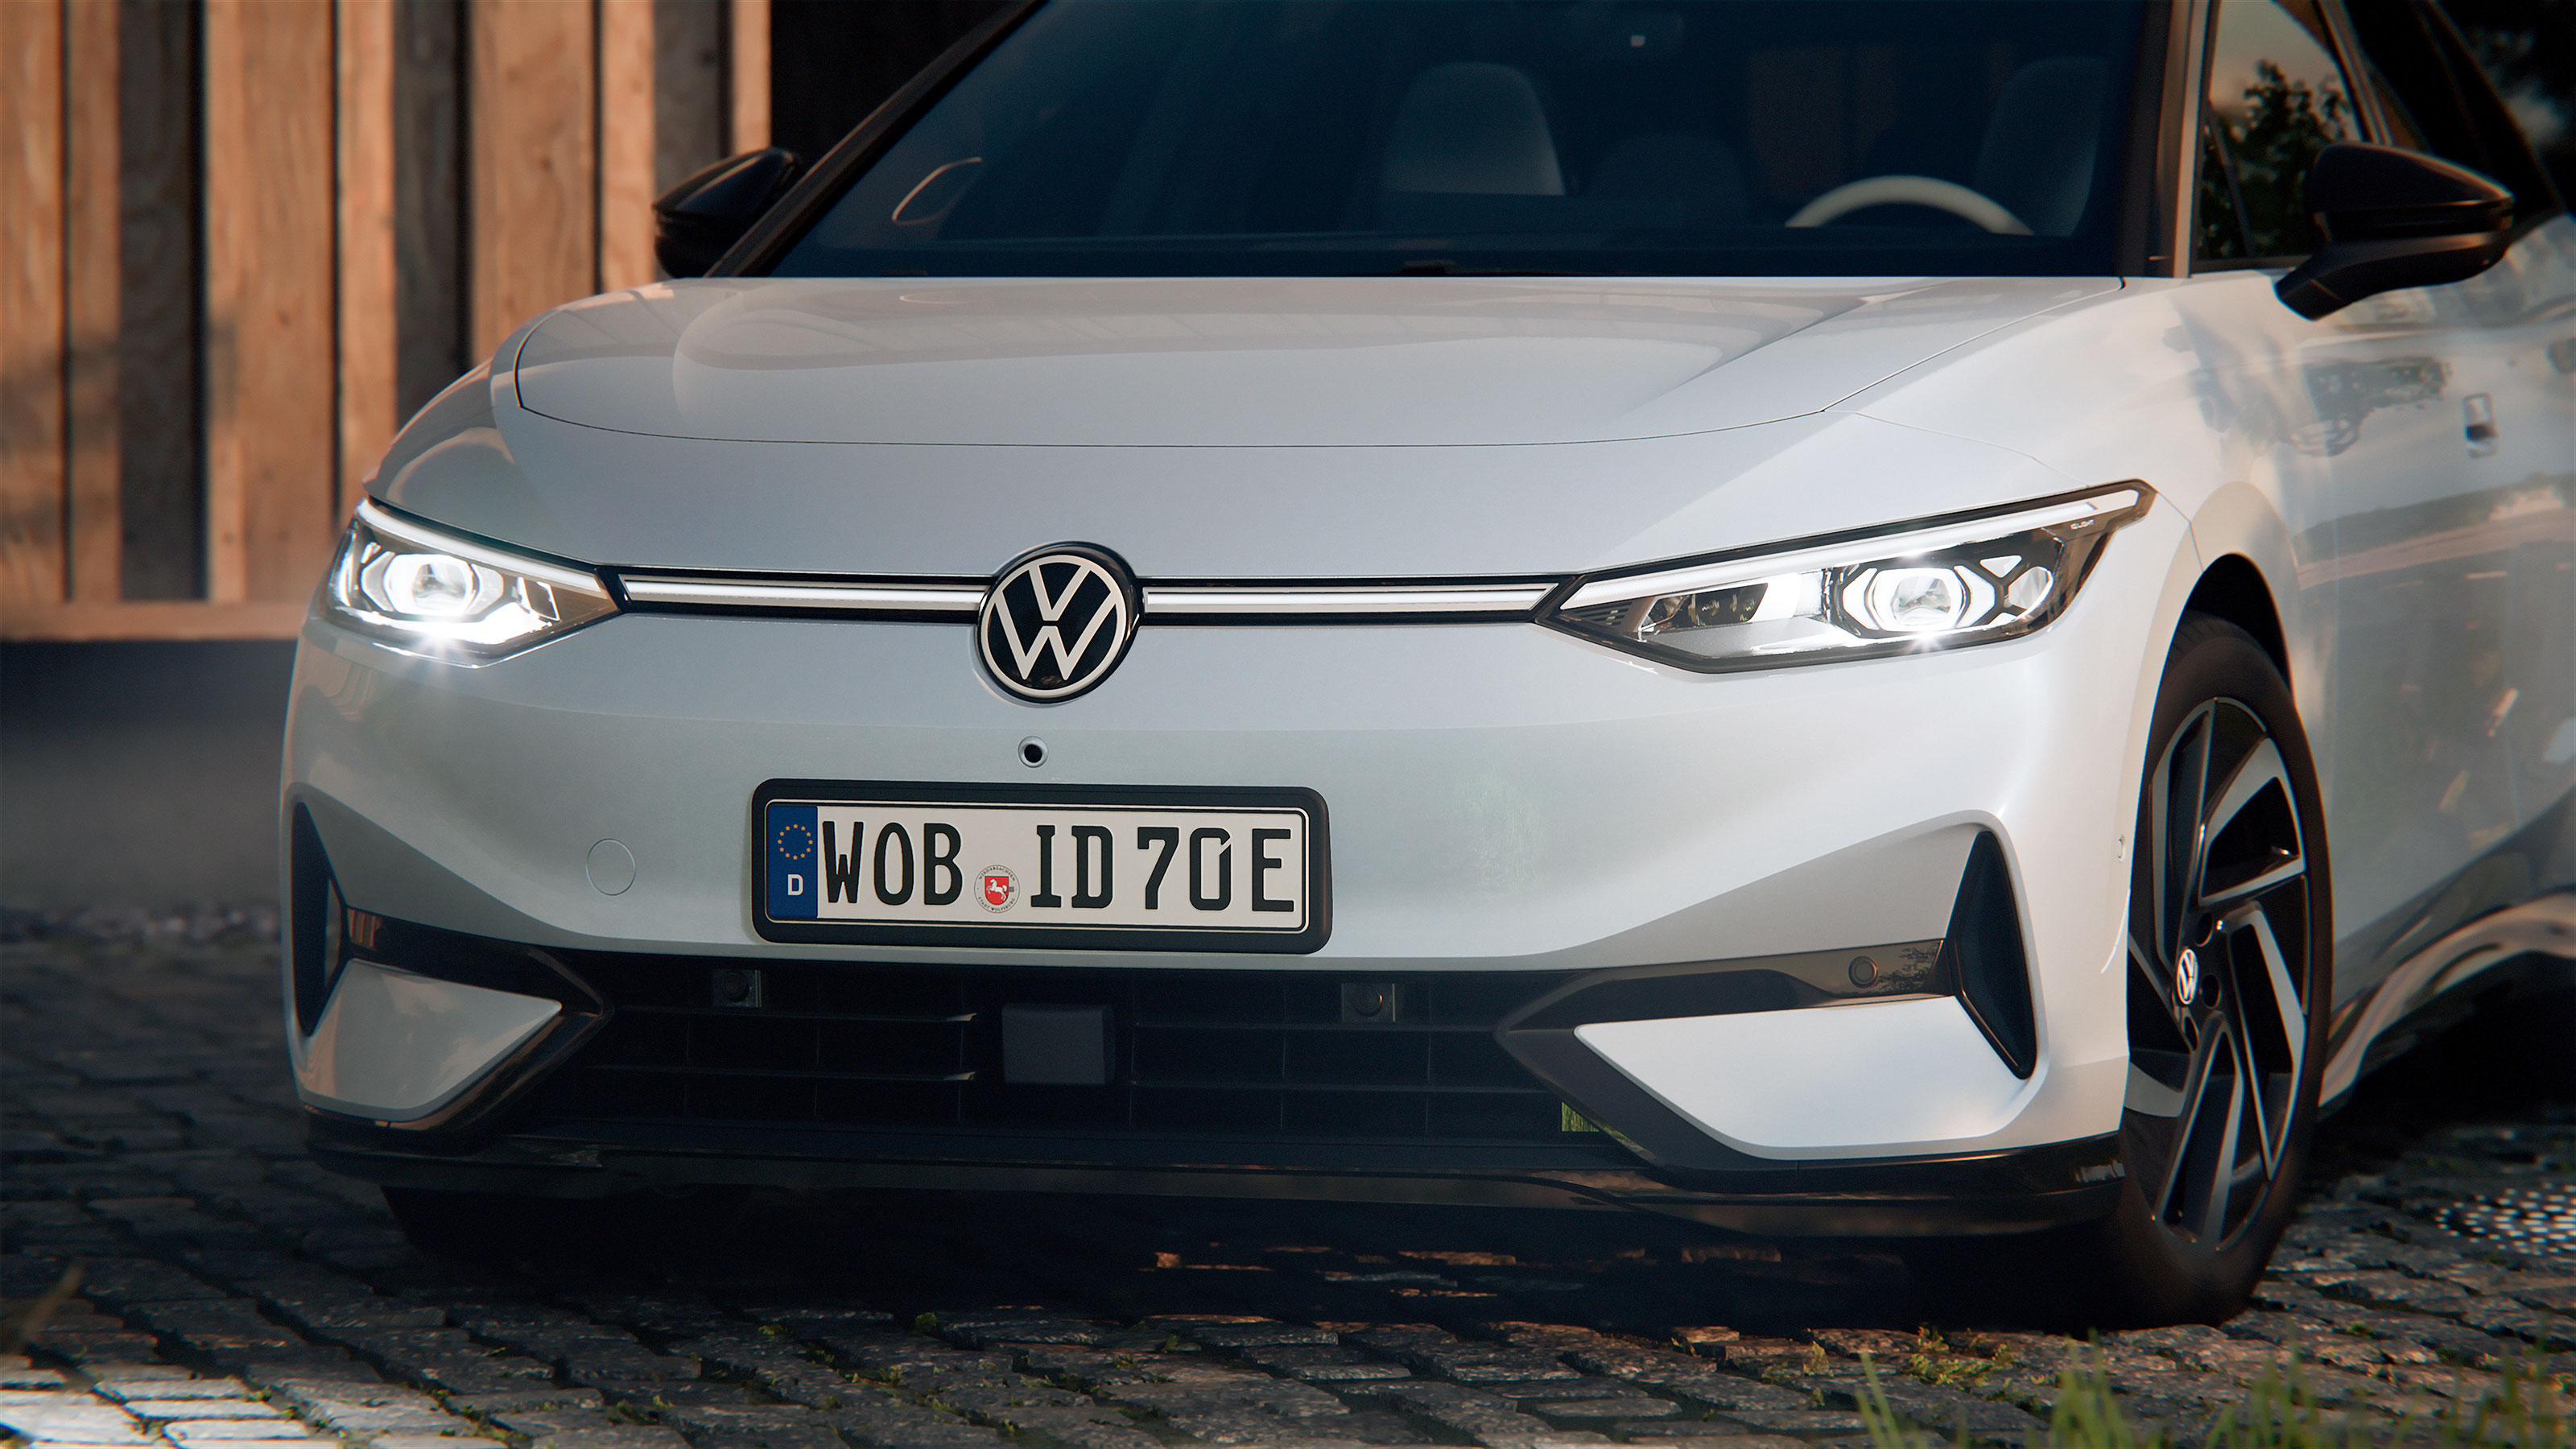 New Volkswagen ID.7 brings the fight to the Tesla Model 3